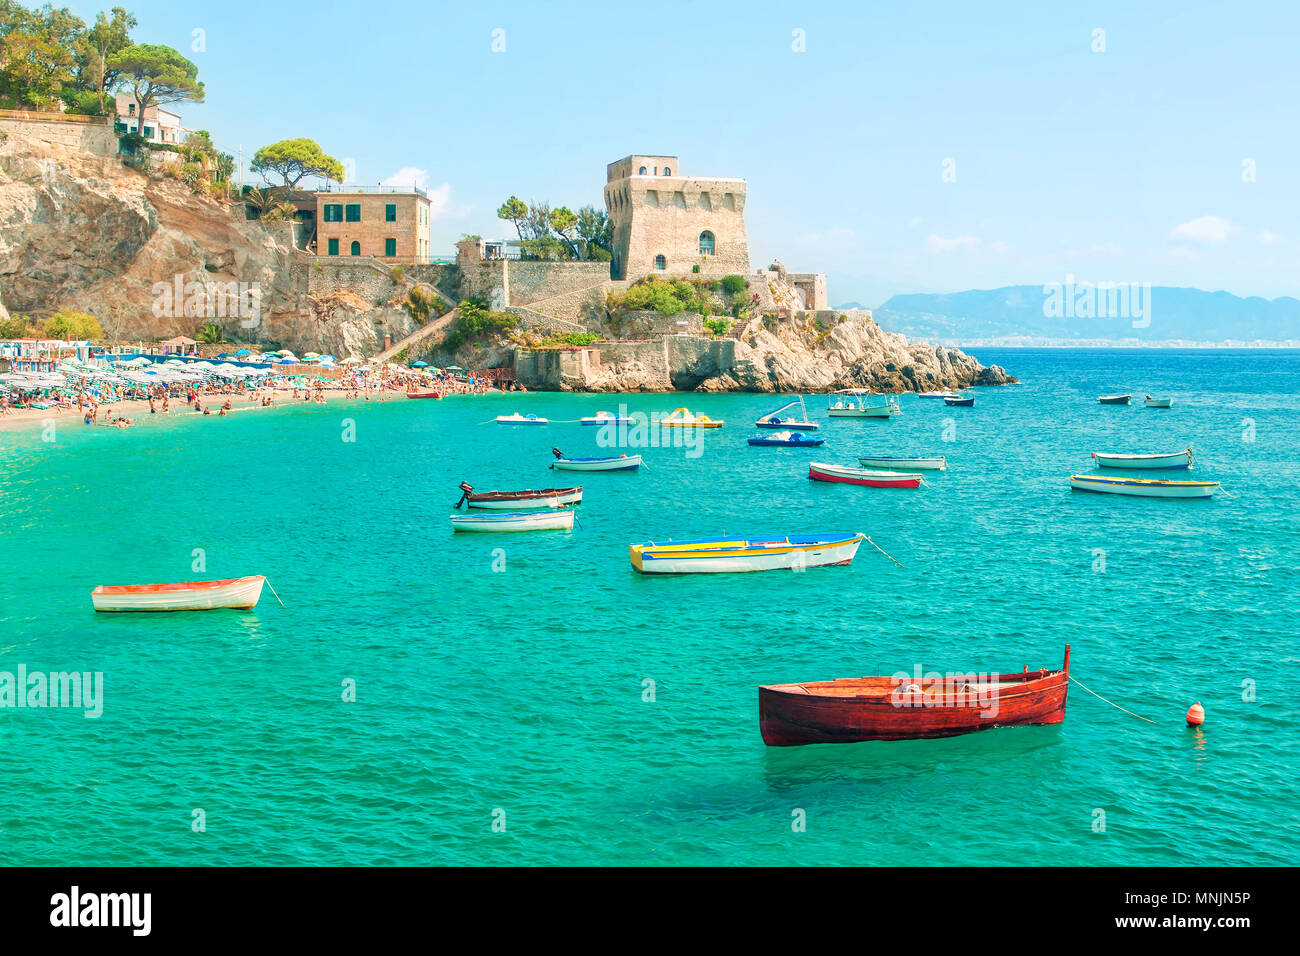 beautiful view of moored fishing boats at Erchie beach with old castle in background on sunny summer day, Amalfi coast, Salerno, Campania, Italy Stock Photo